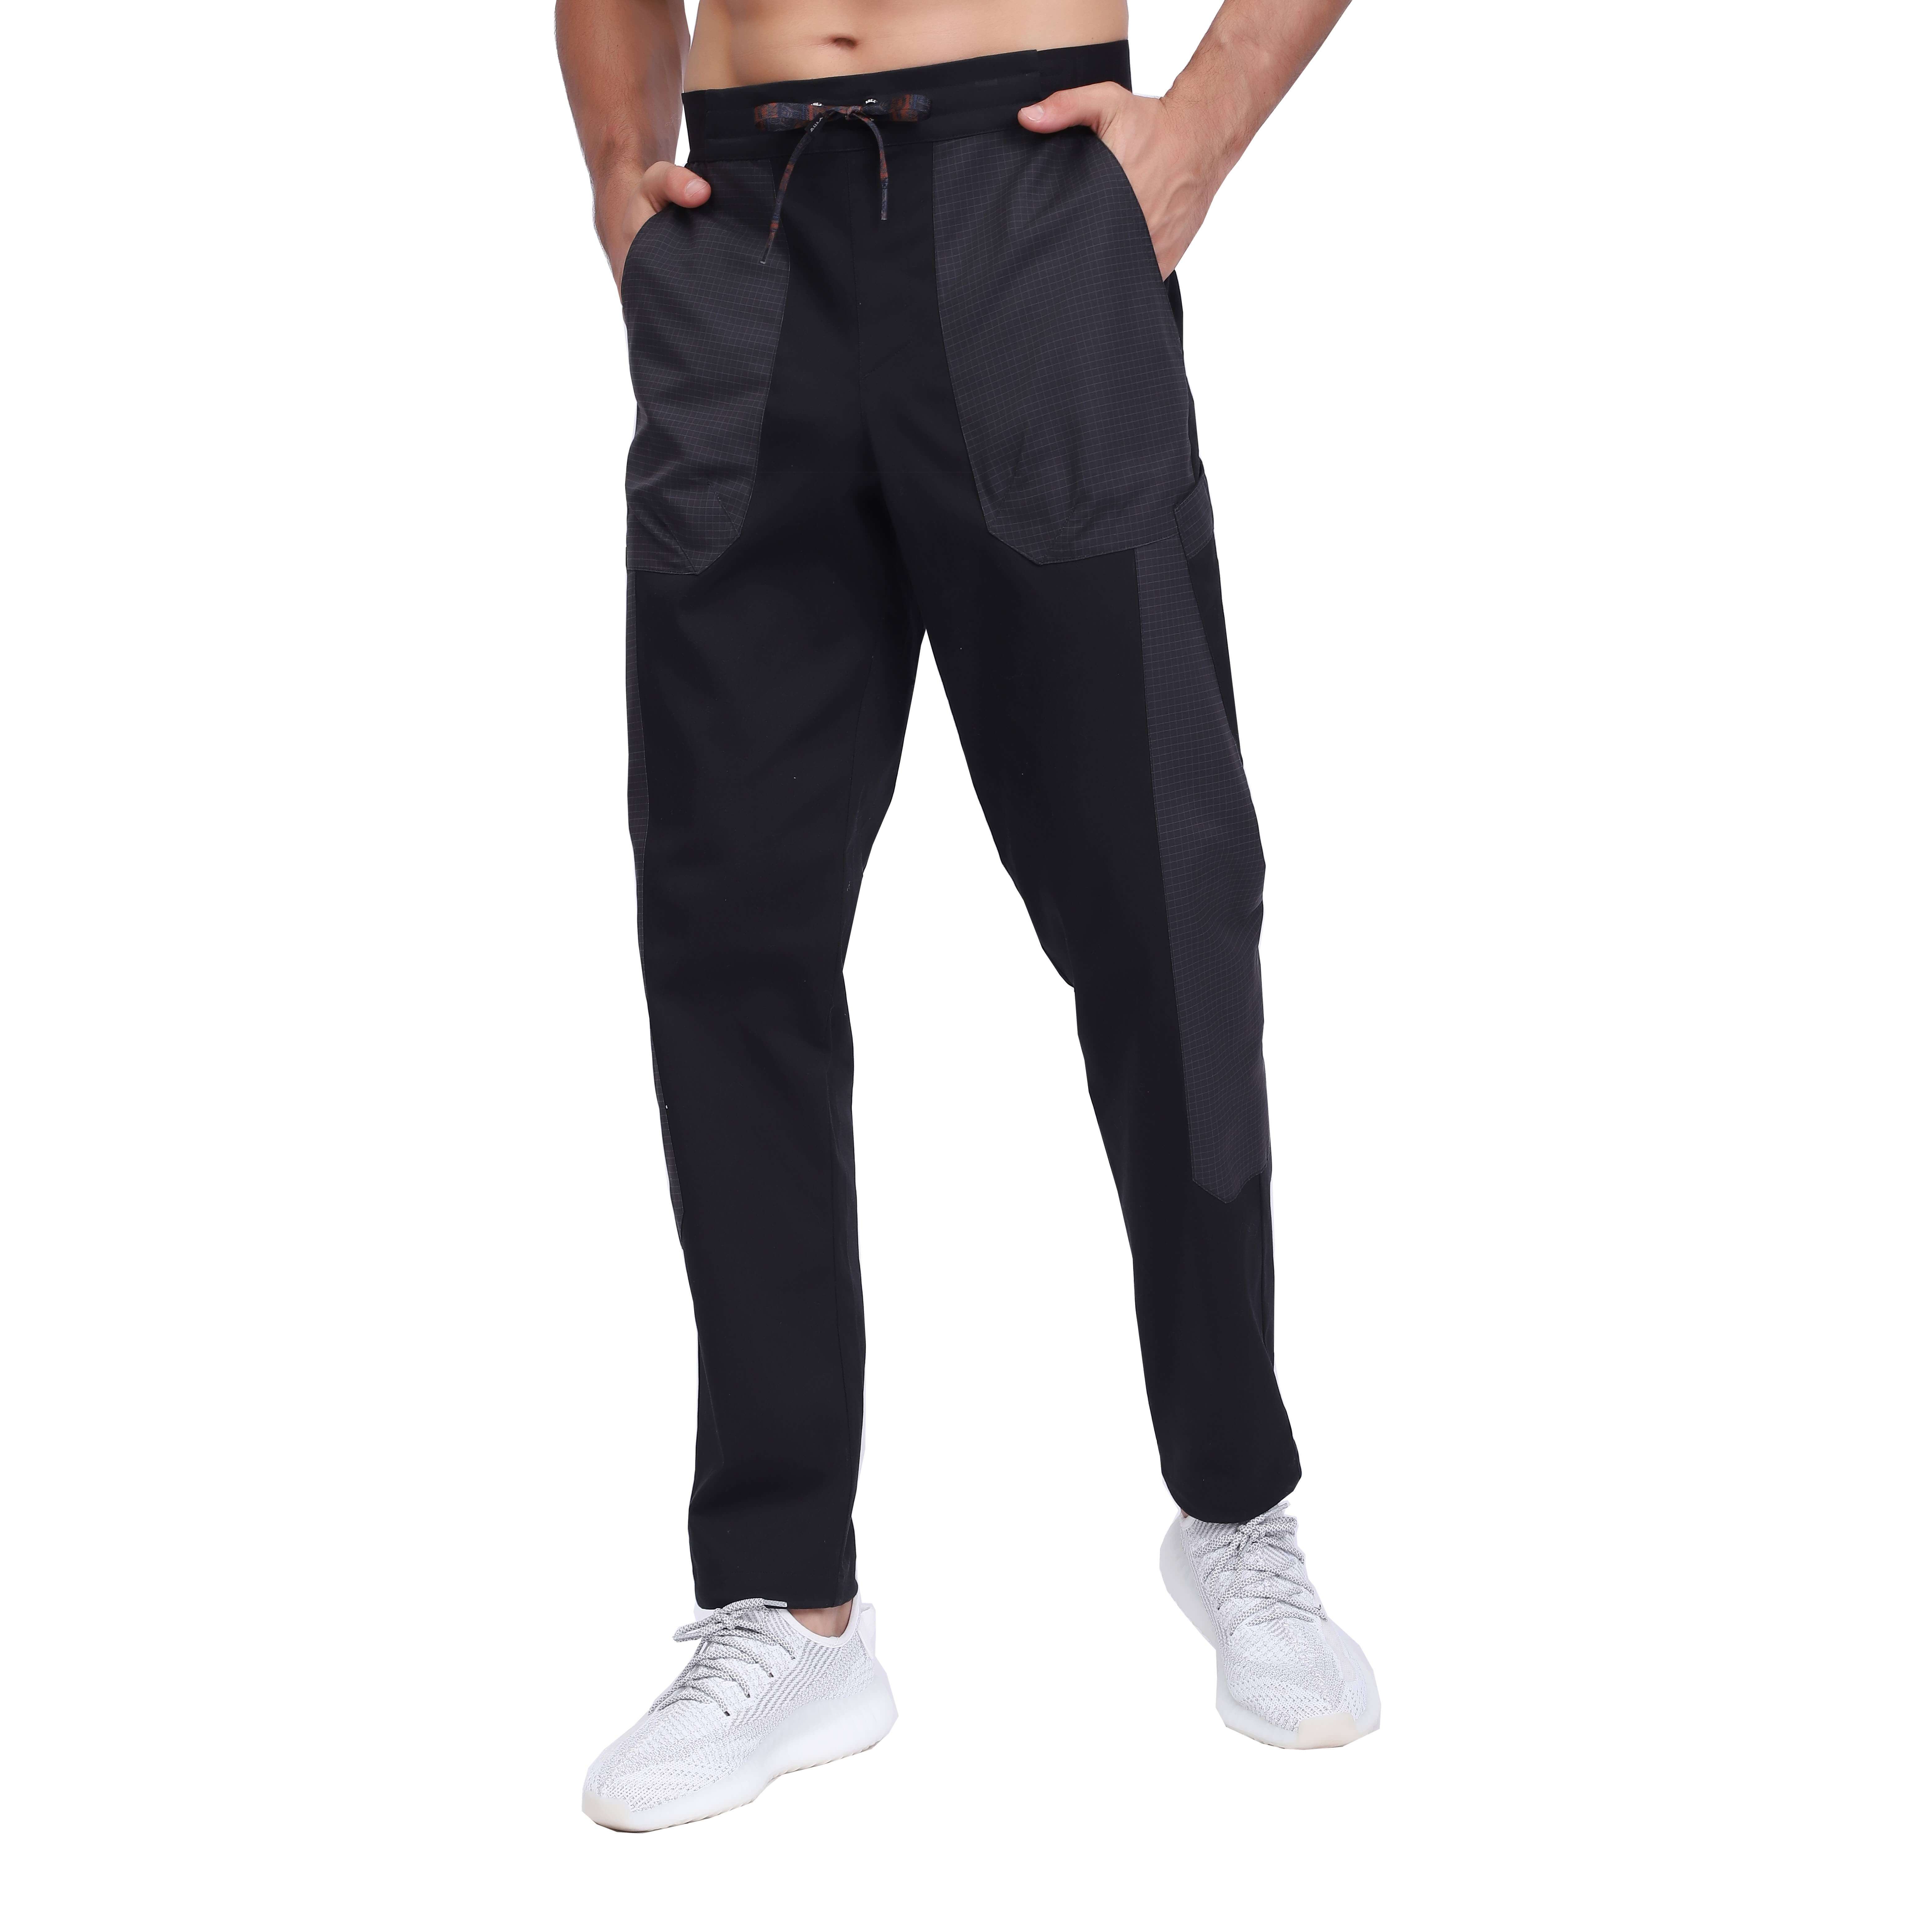 Men's Black Casual Outdoor Breathable Hiking Walking Trousers 